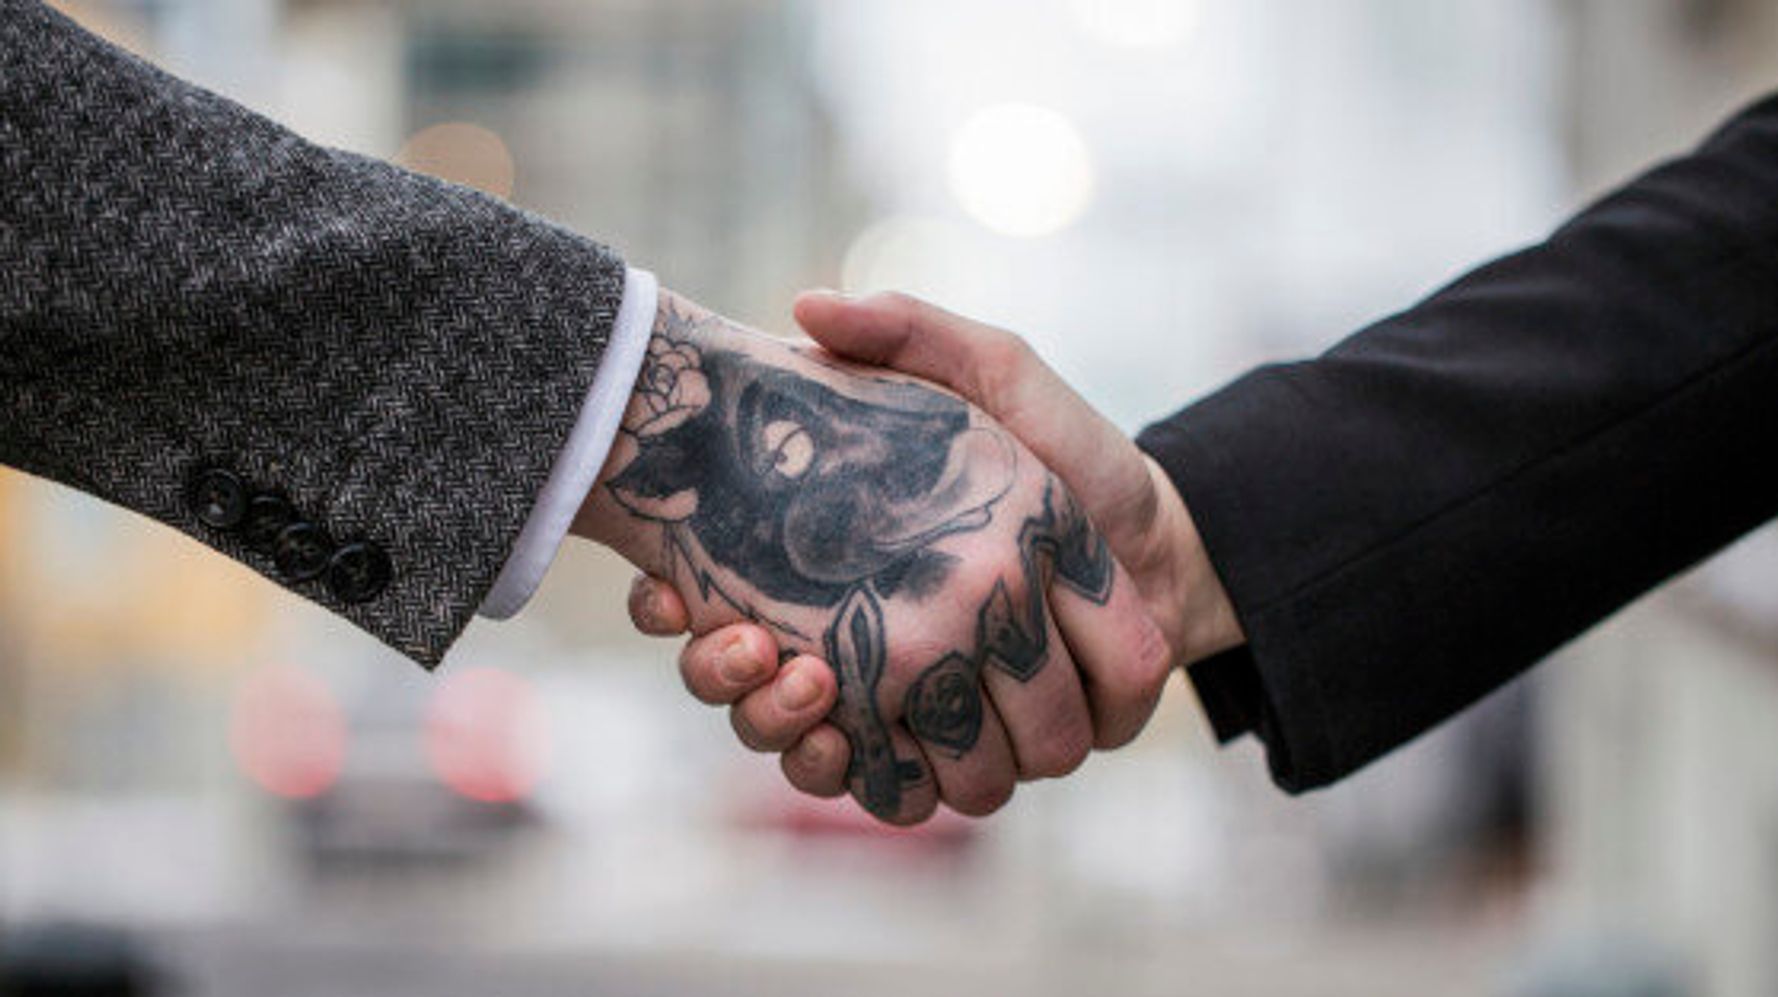 Gene Simmons Taught Me The Value Of A Good Handshake | HuffPost Business